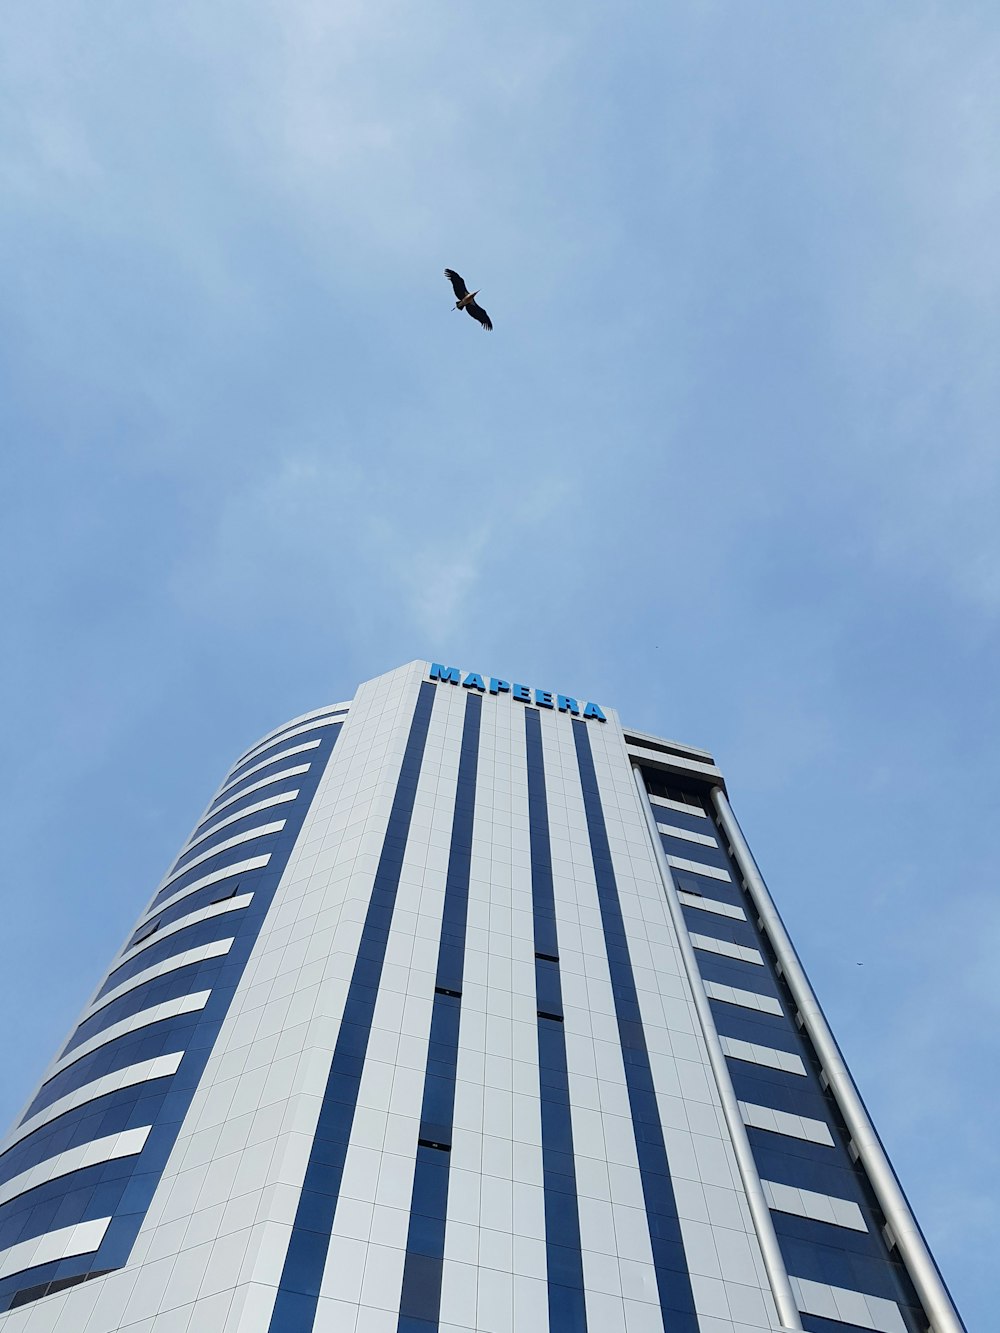 black bird flying over white and blue building during daytime